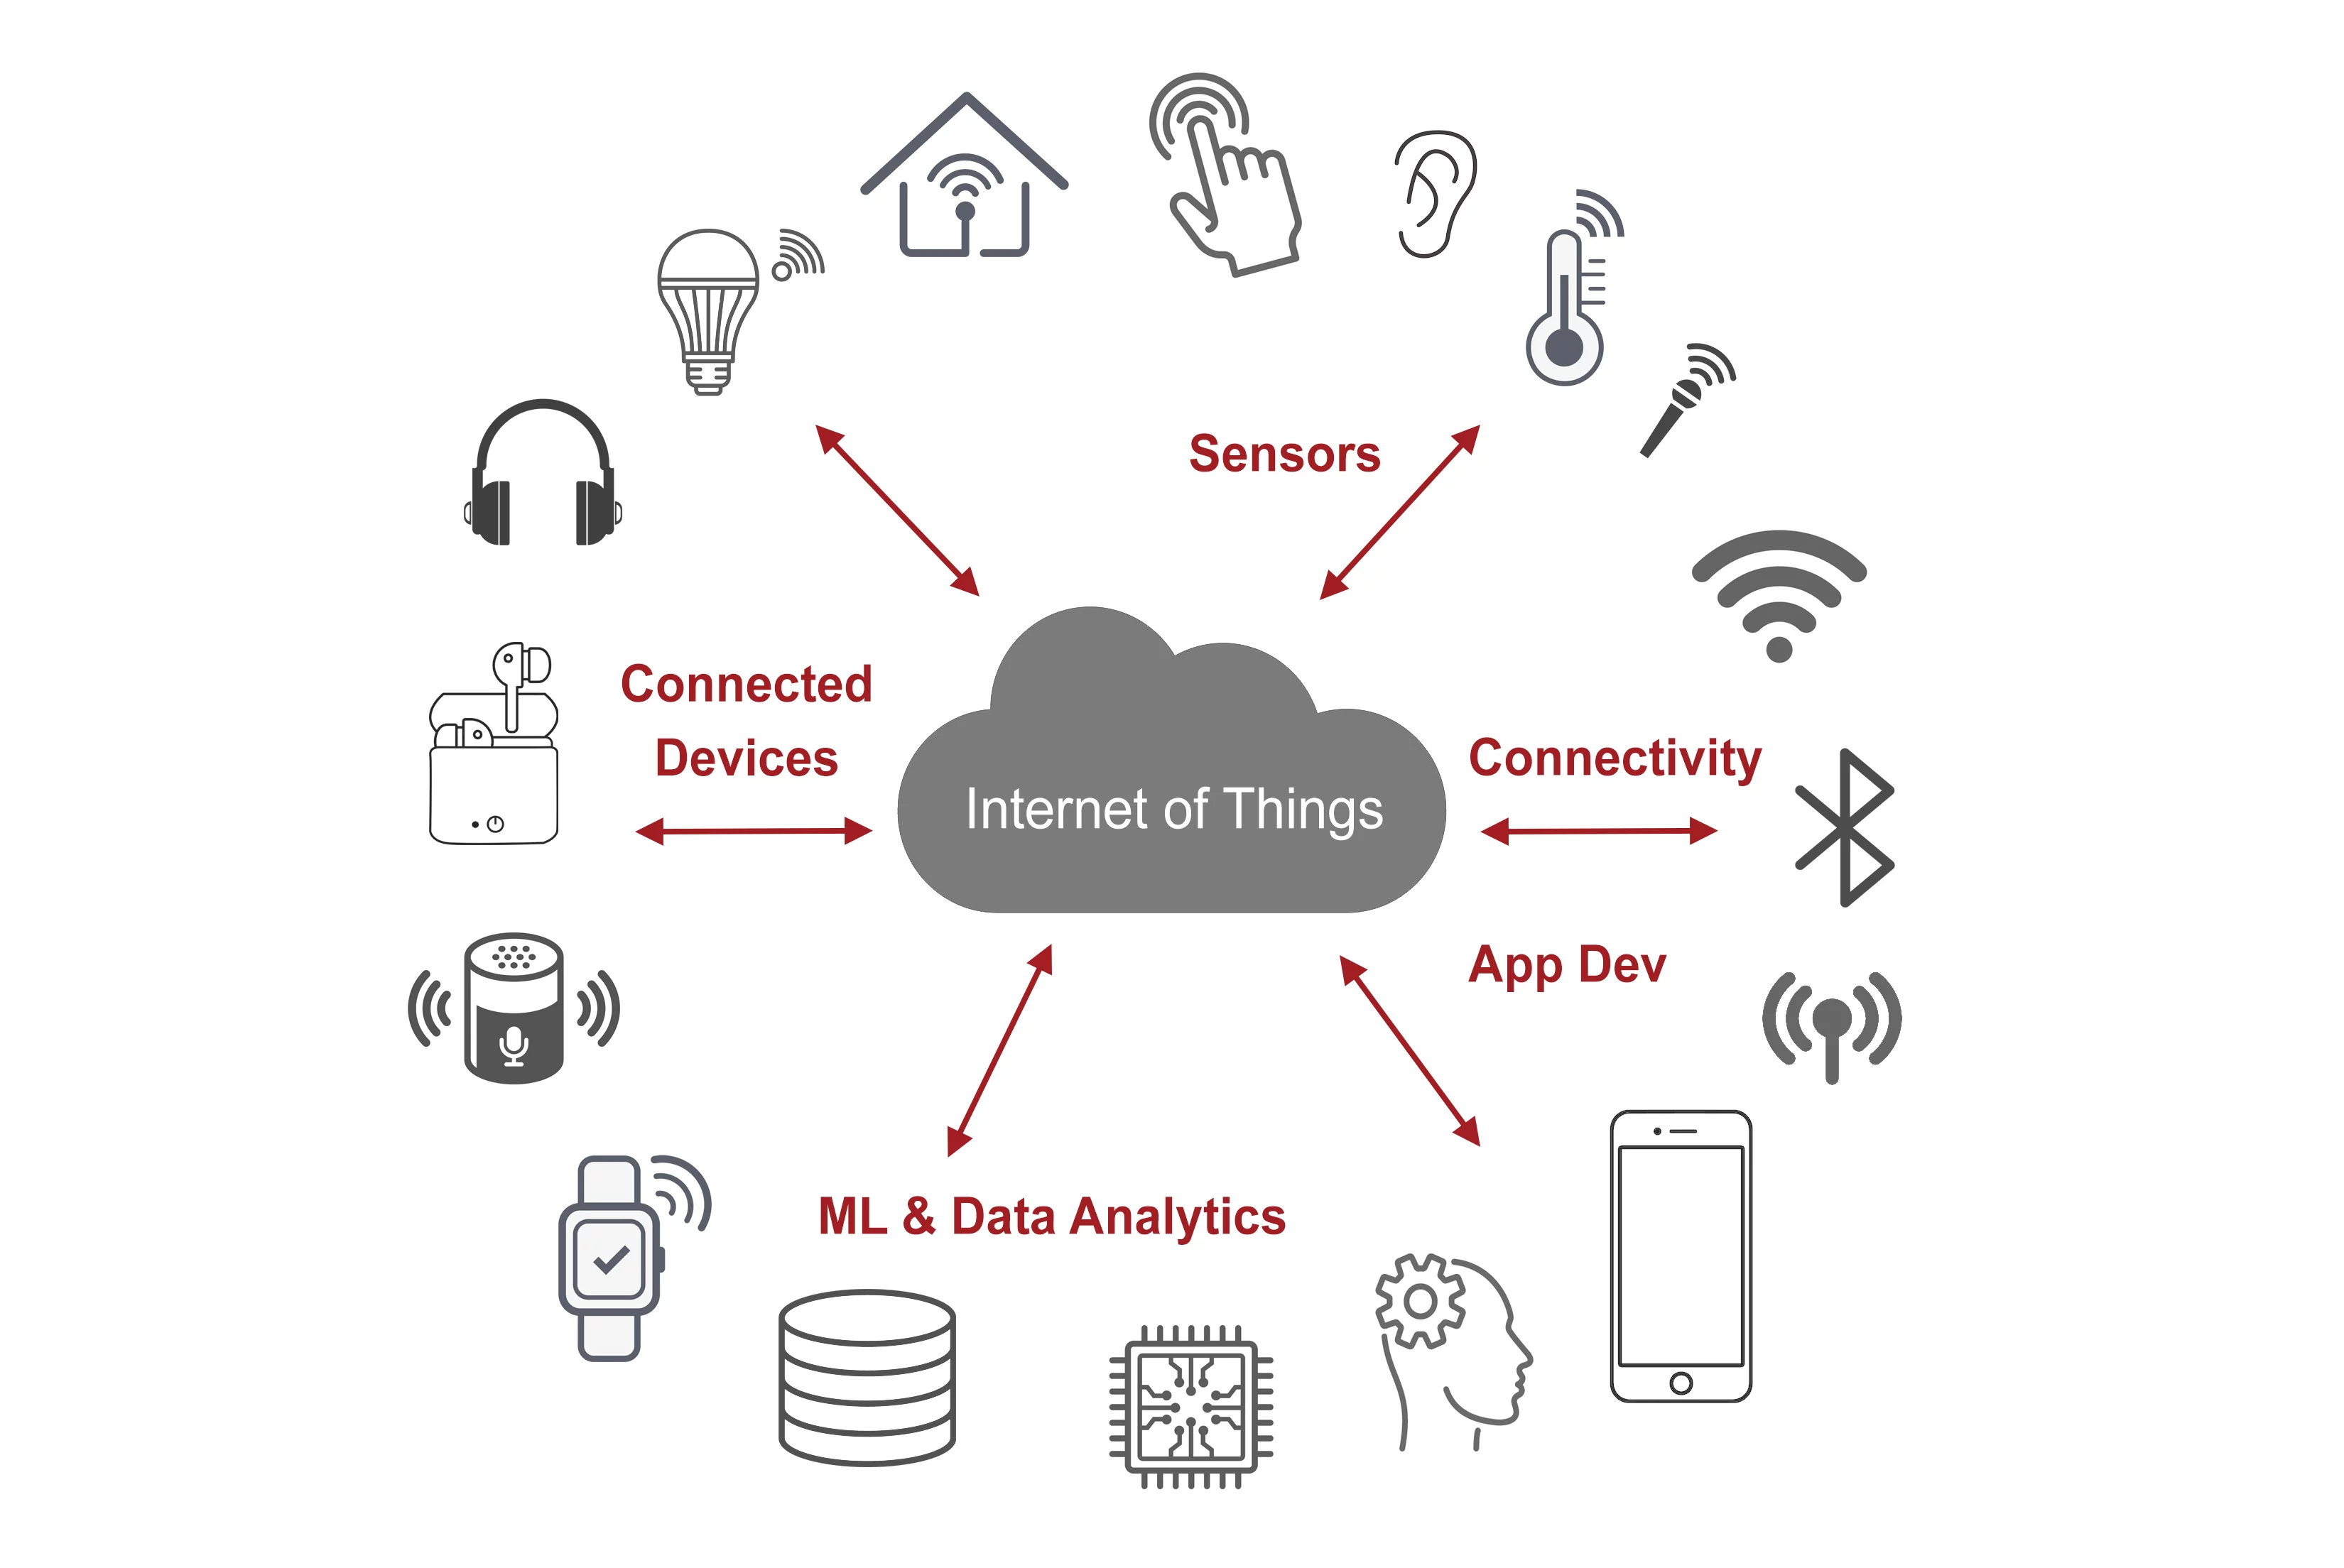 Graphic showing connected device design and engineering, including arrows to and from the "internet of things" cloud and connected devices, sensors, connectivity, application development, and AI and machine learning analytics